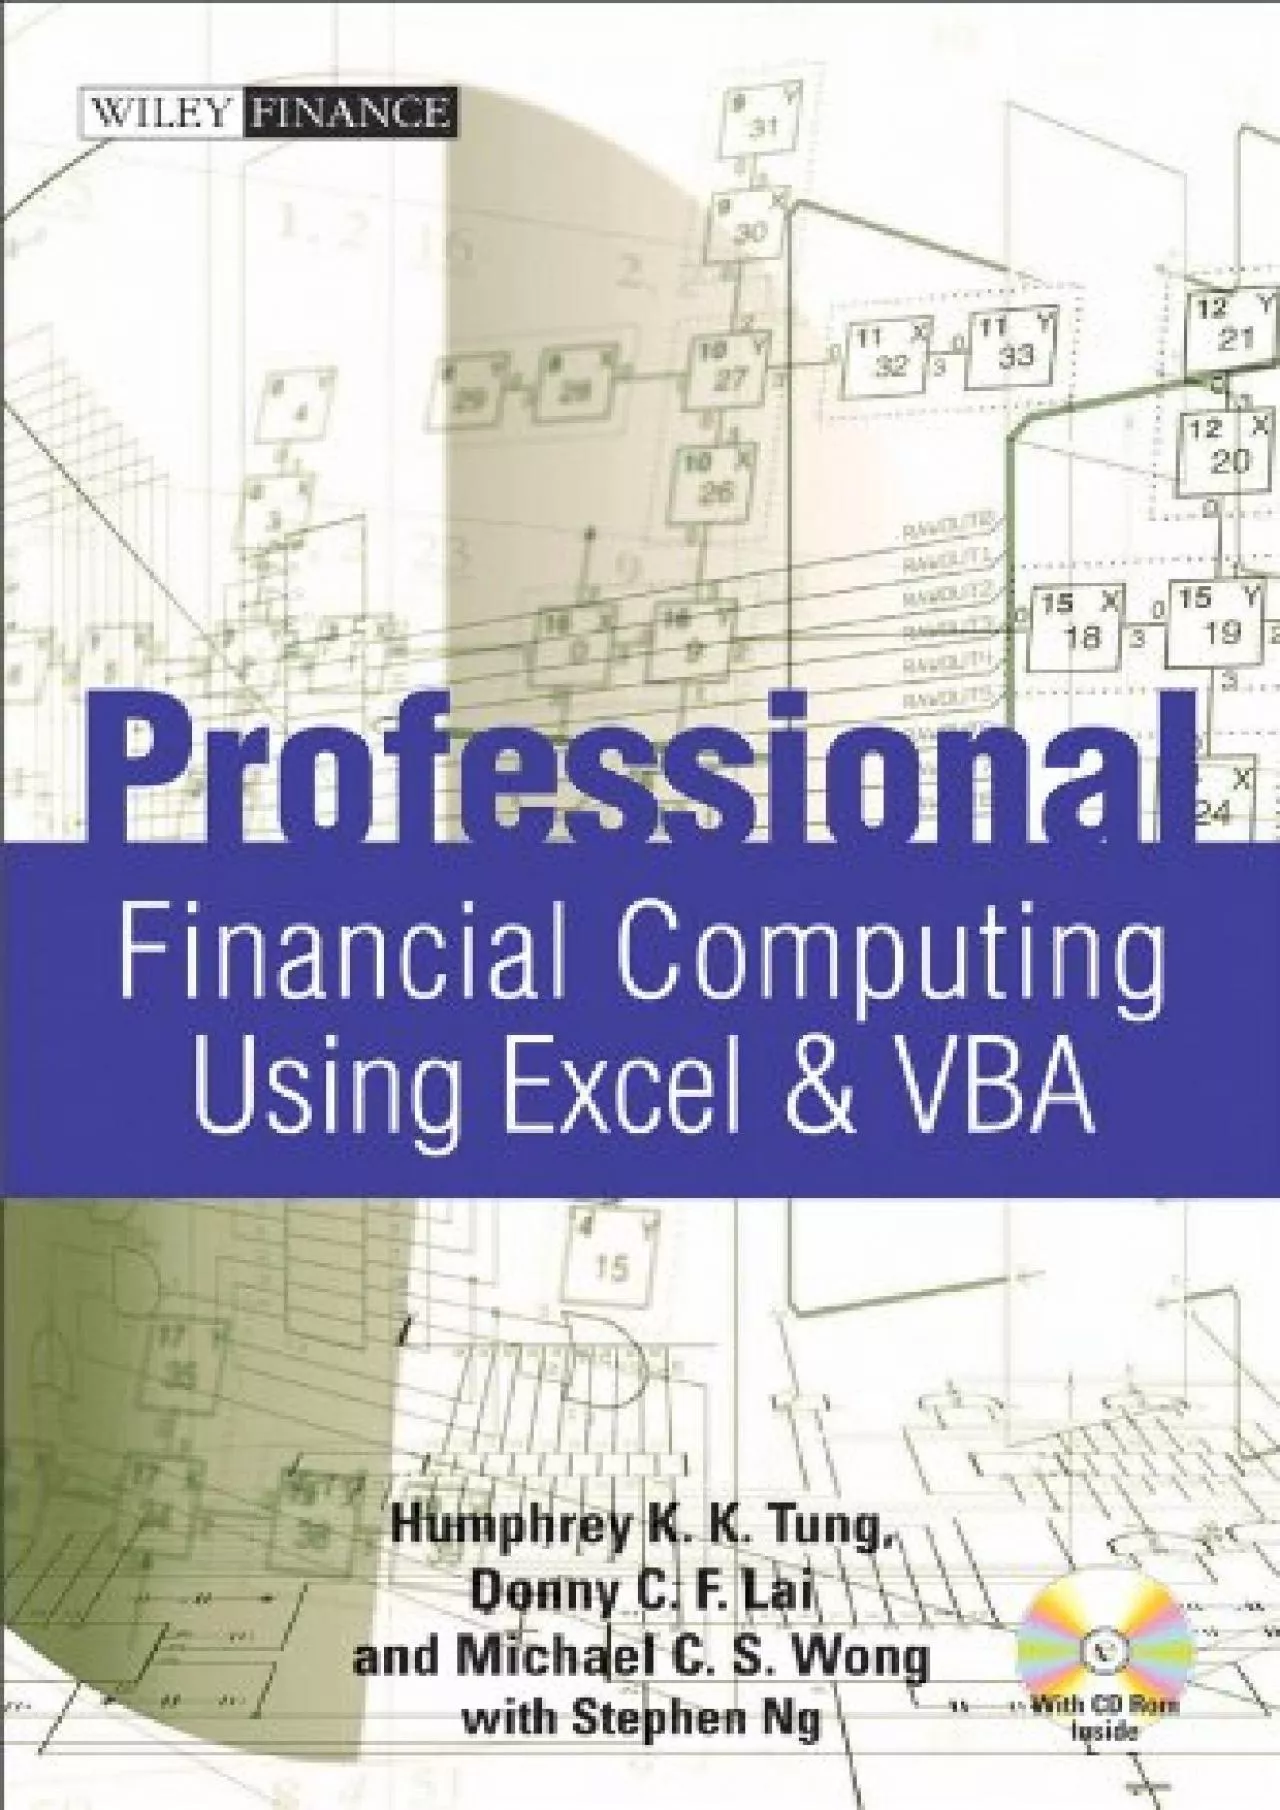 (DOWNLOAD)-Professional Financial Computing Using Excel and VBA (Wiley Finance Book 763)